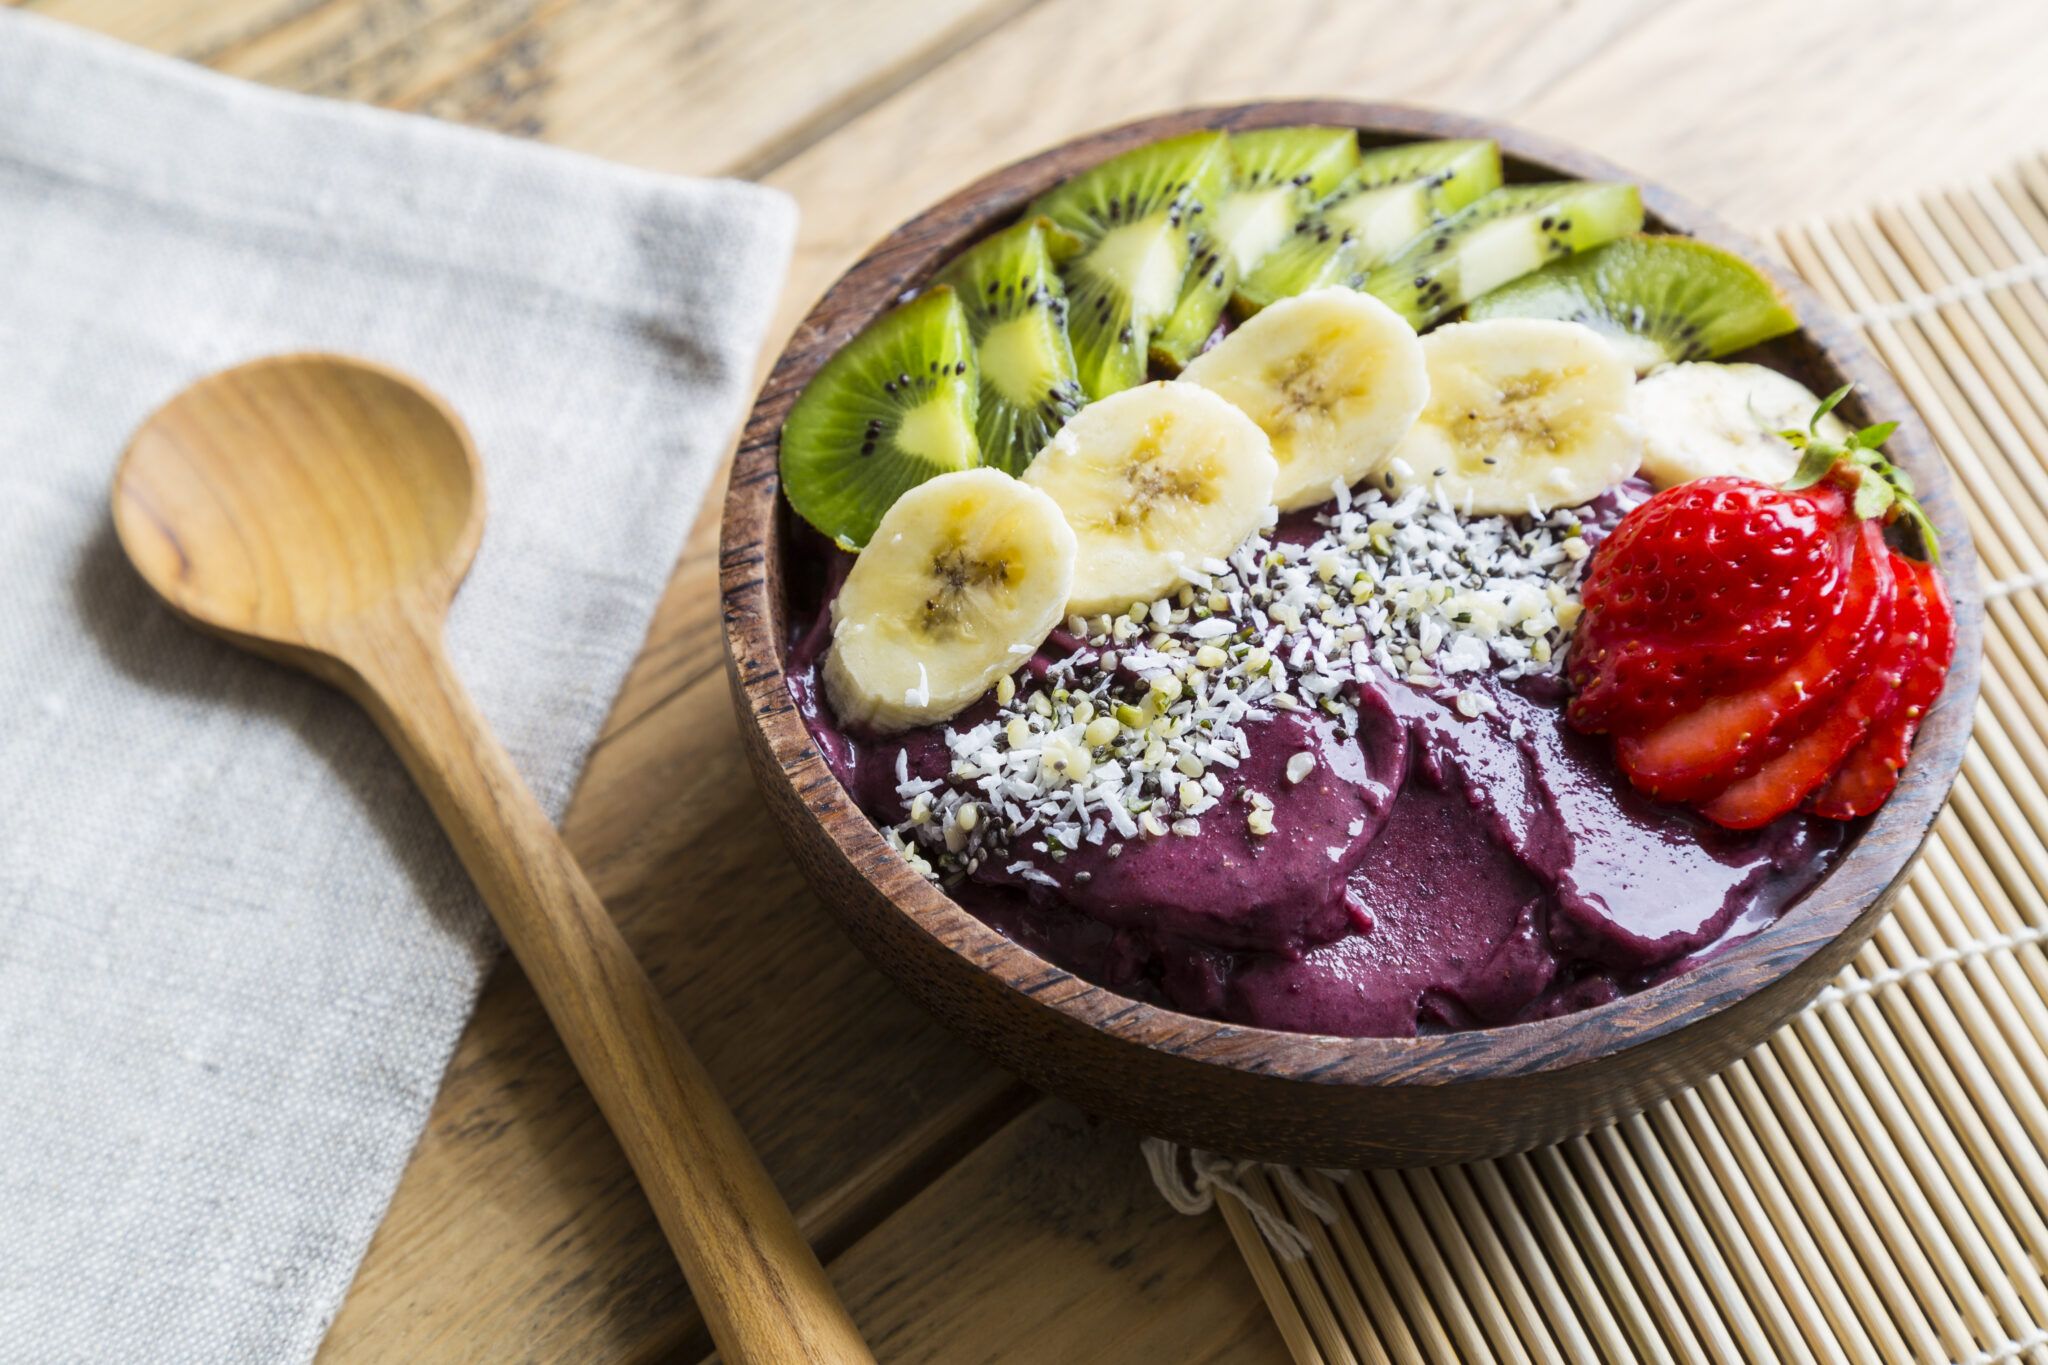 Authentic Fruits to launch ready-to-eat smoothie bowls at Speciality & Fine Food Fair